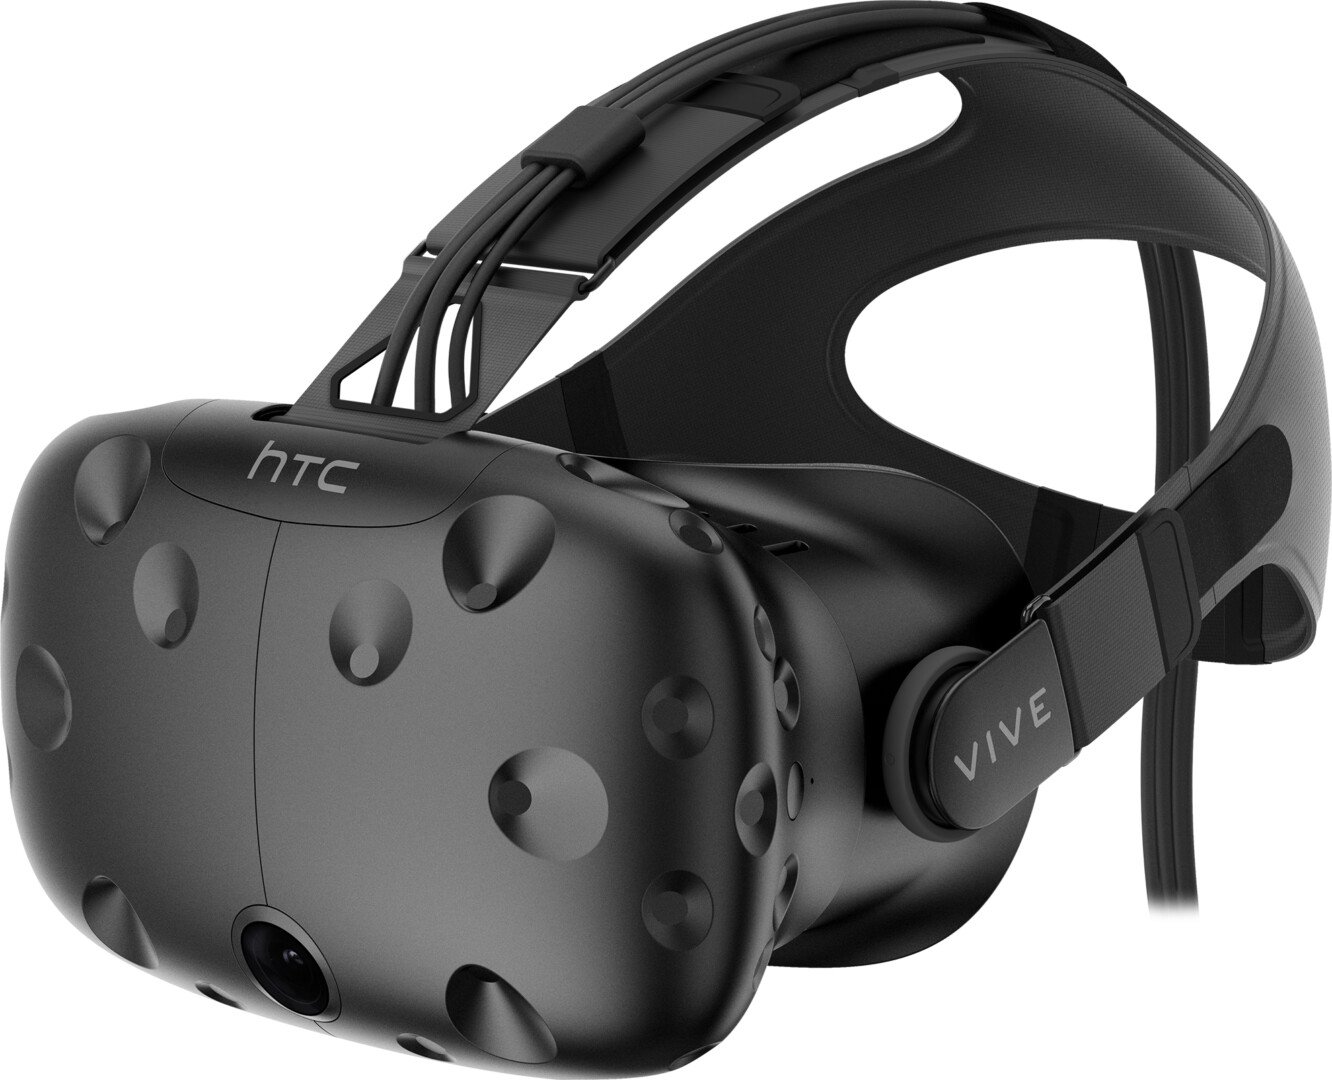 Hardware Review: Htc Vive 6